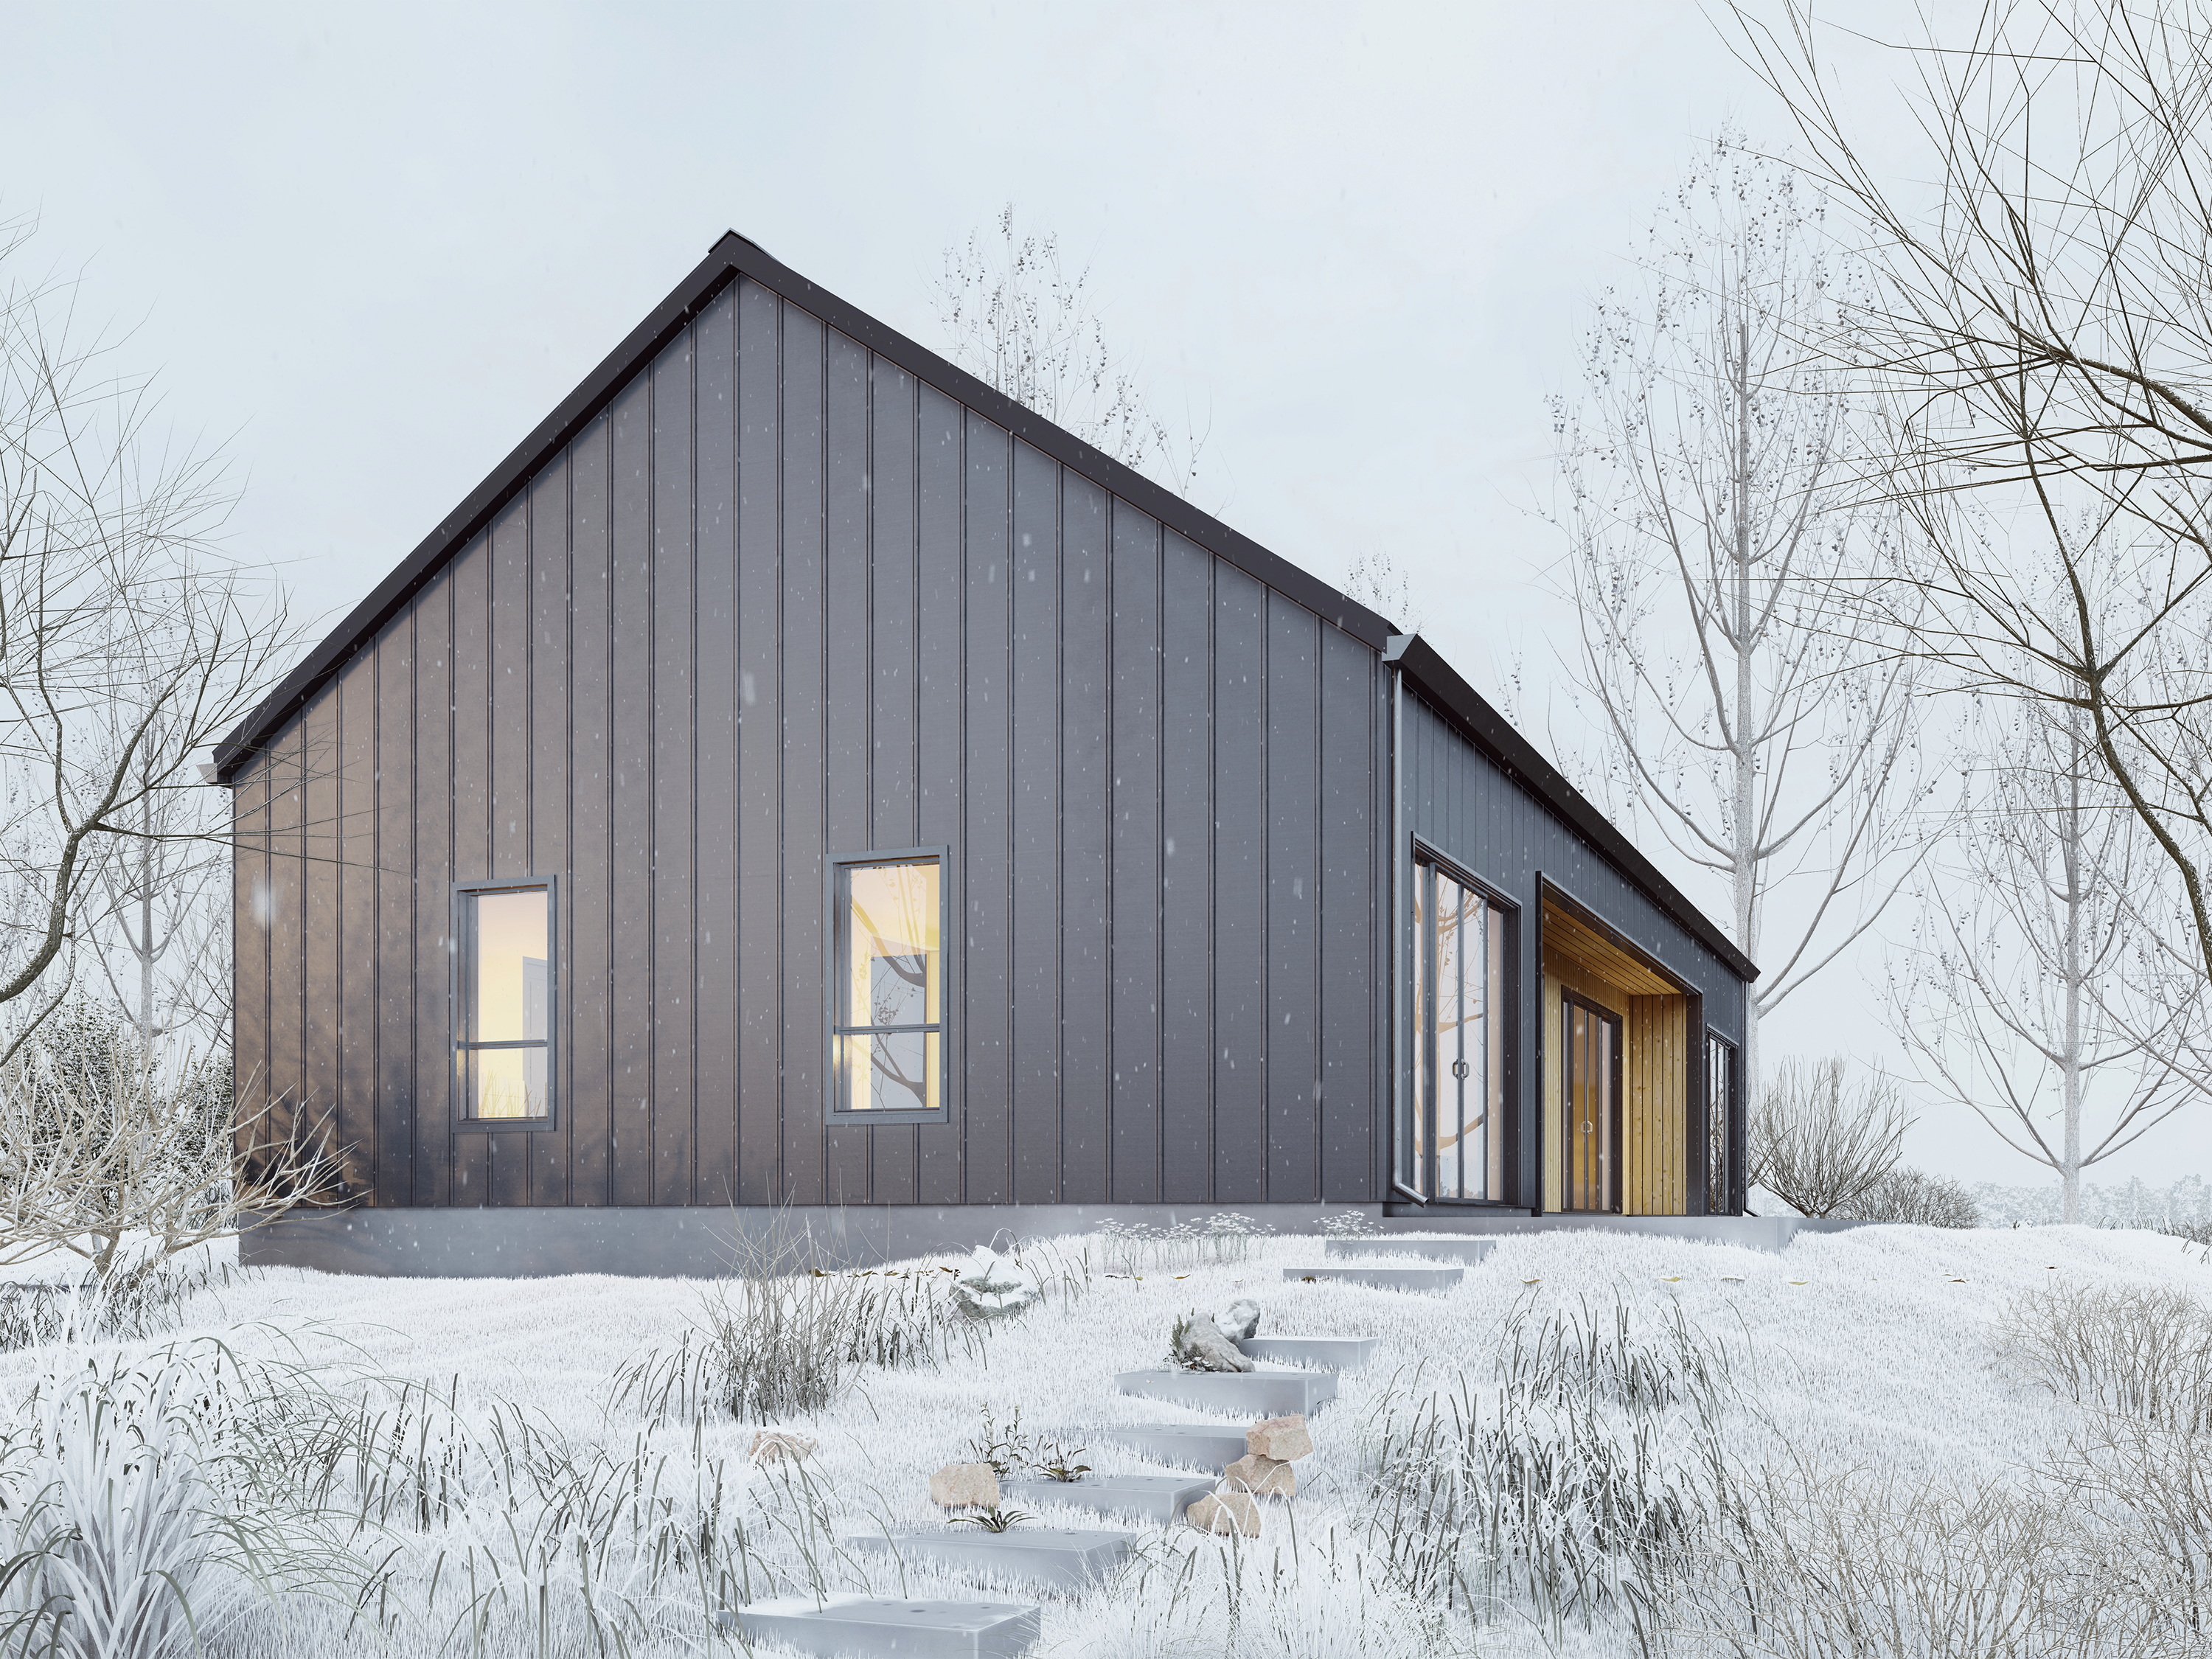 DesignwithFRANK's 2 Bedroom Modern Large Cabin. Black Standing seam metal roof and siding